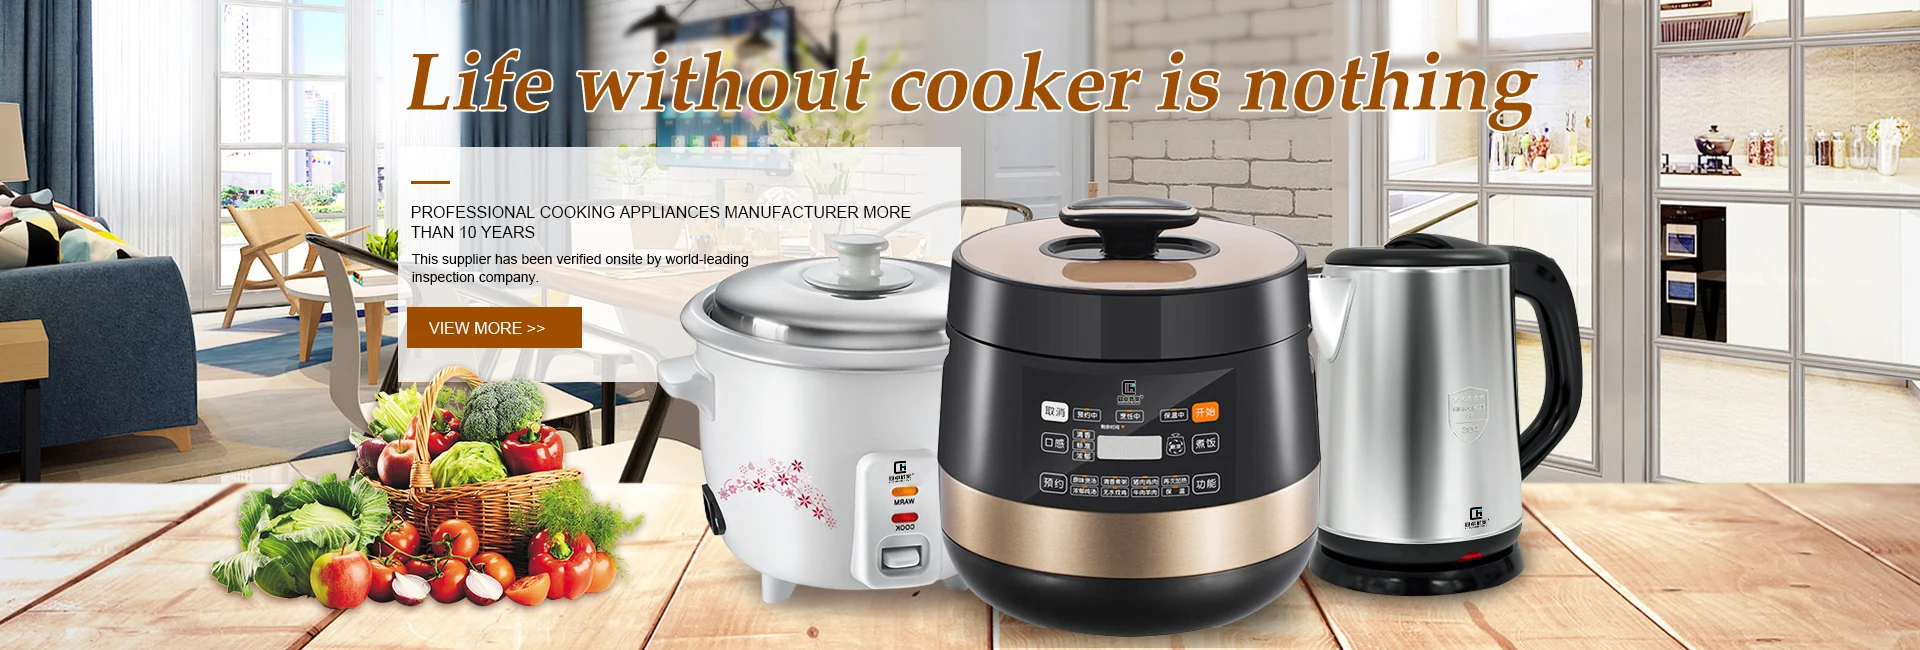 large electric cooker